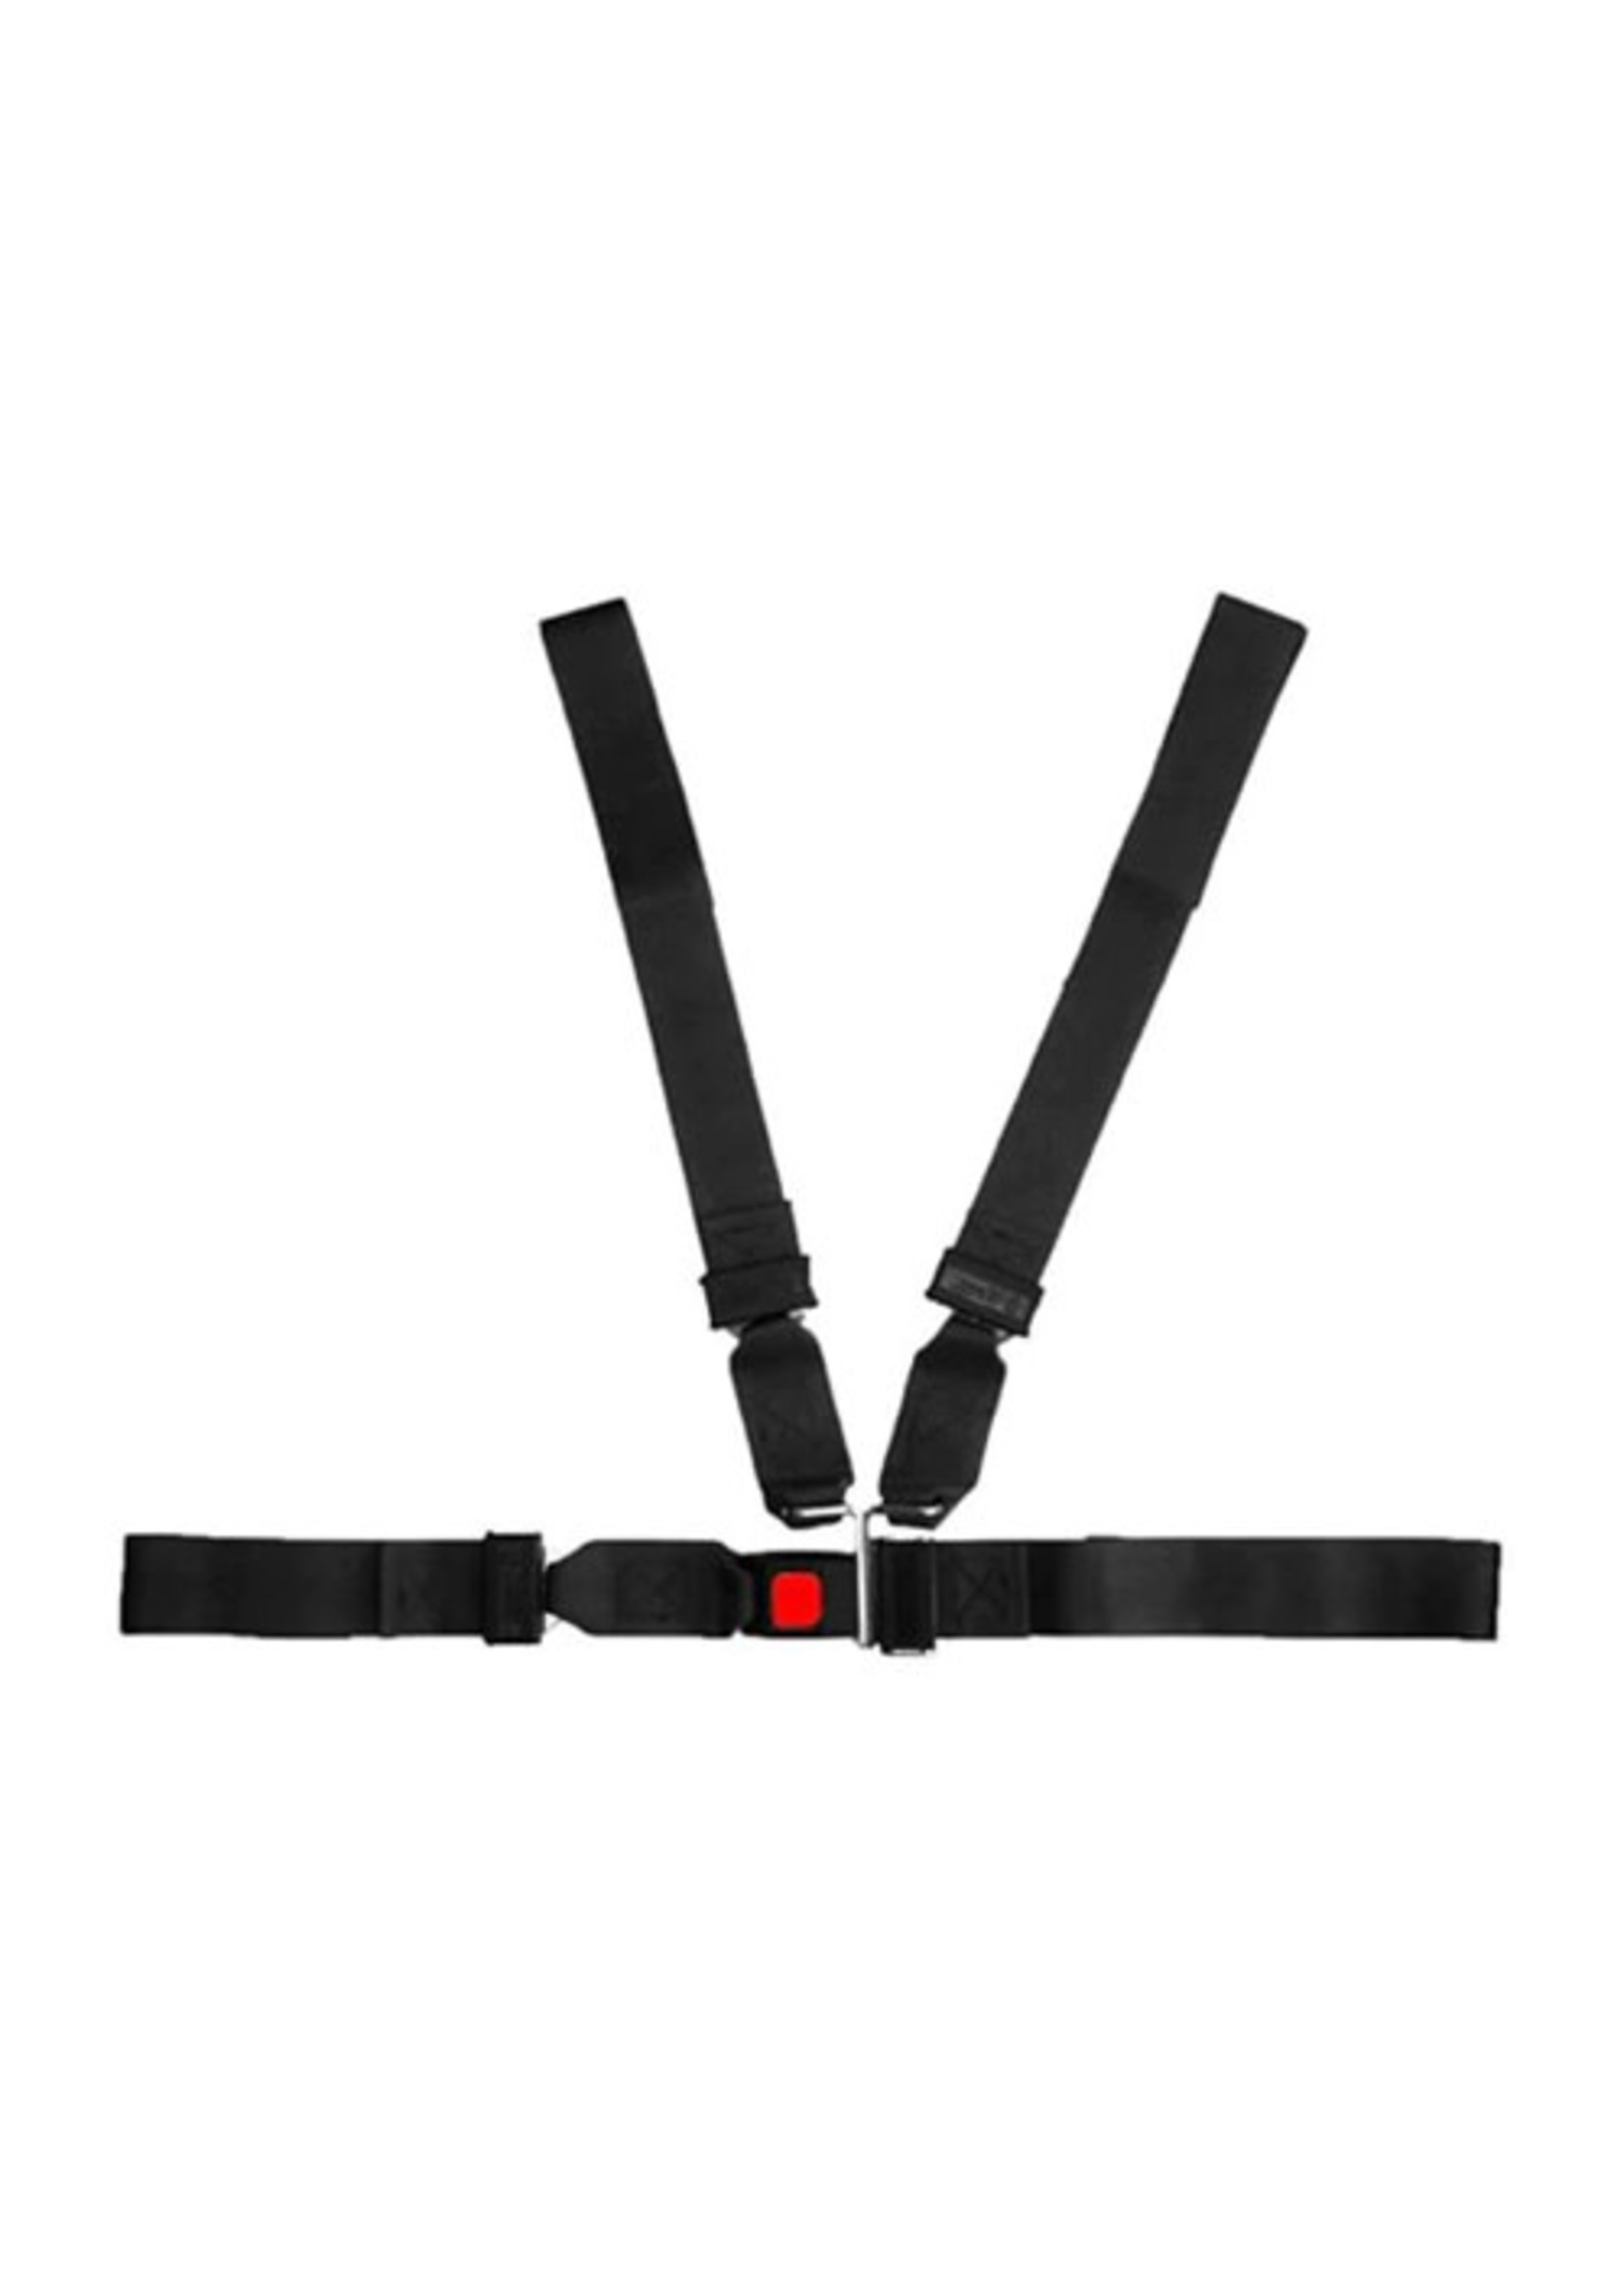 Replacement Strap For Stretcher Chest/Harness